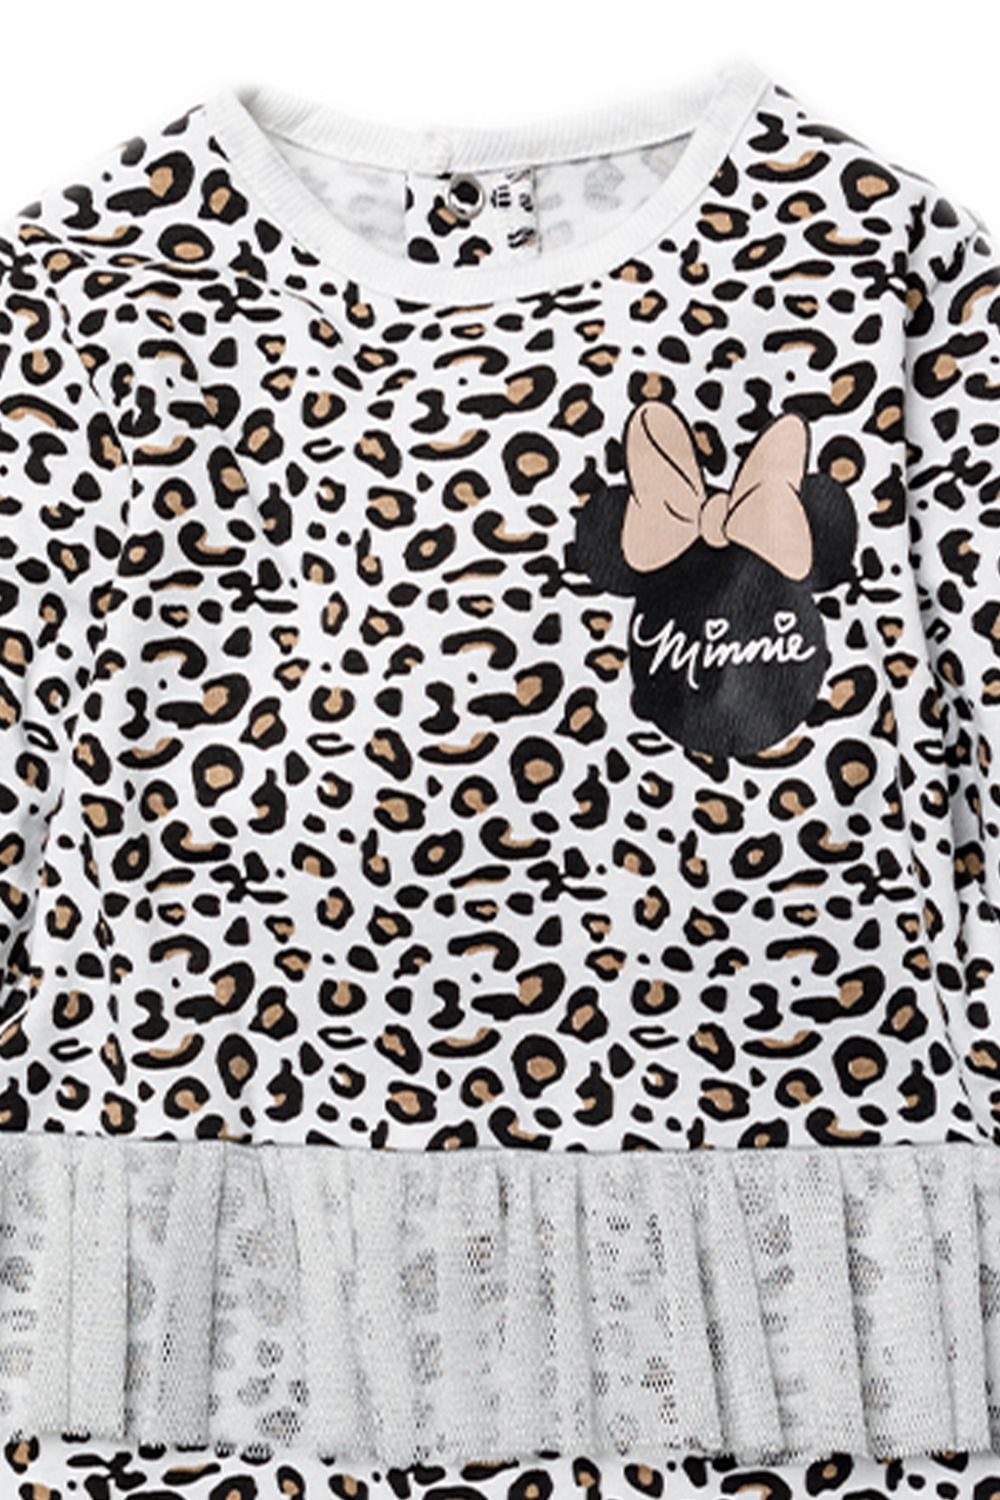 This adorable Disney Baby sleepsuit features a funky Minnie Mouse leopard print. The sleepsuit is footed and has a mesh tutu around the waist band! The sleepsuit is cotton with popper fastenings, keeping your little one comfortable. This would be a lovely gift or new addition to your little ones wardrobe!